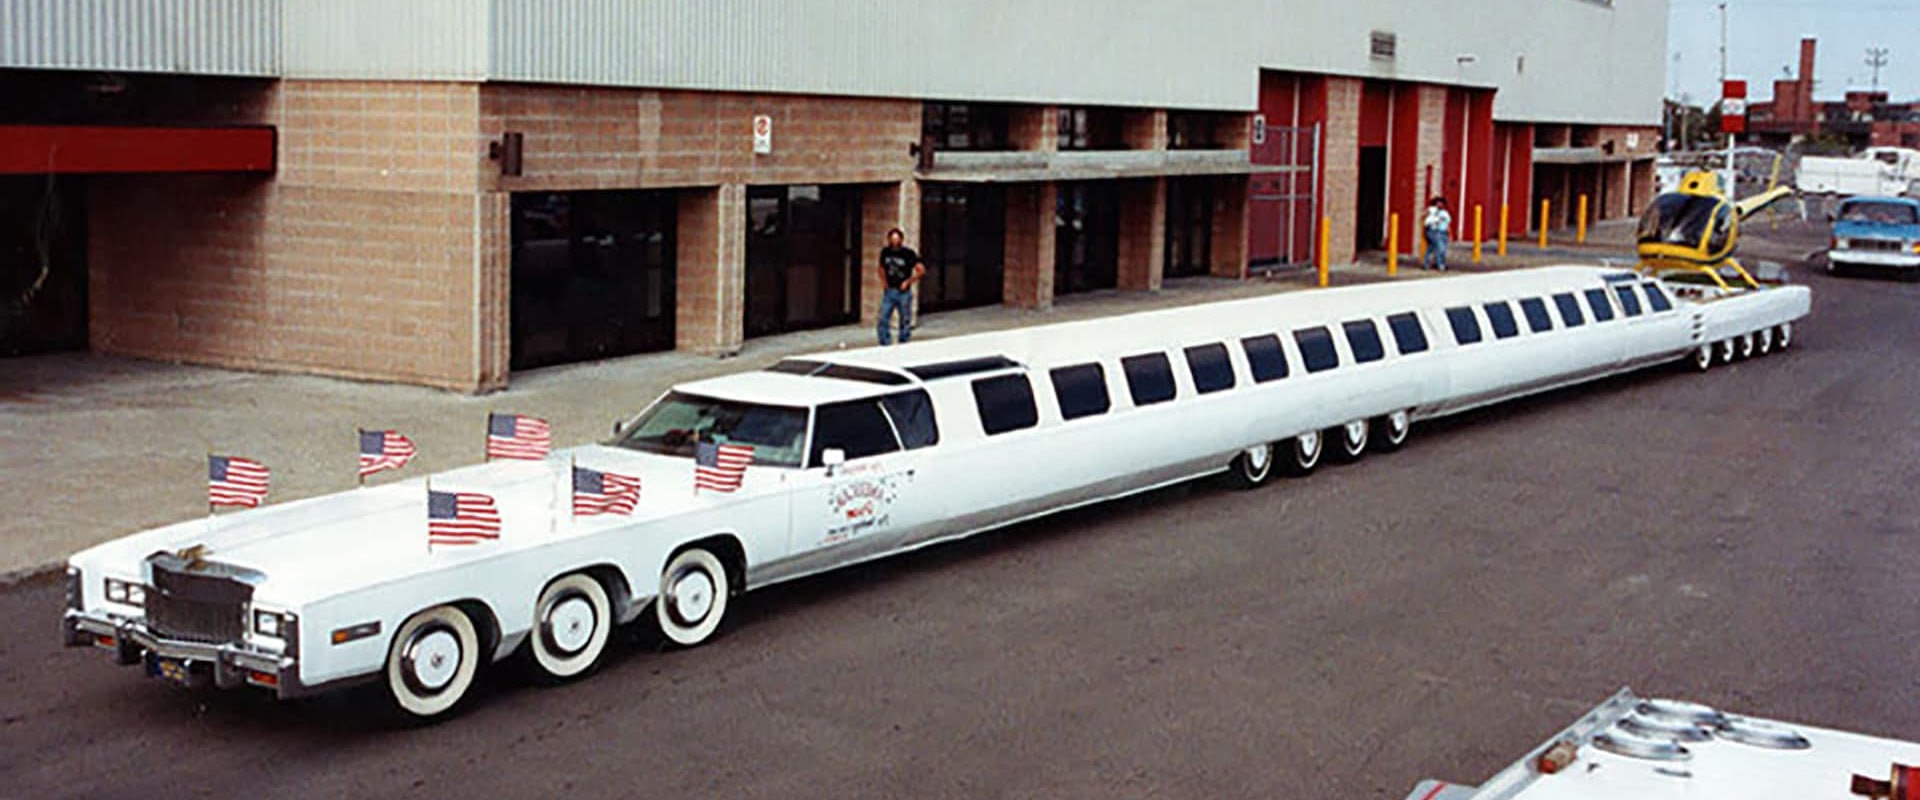 Who Owns the World's Longest Limousine?